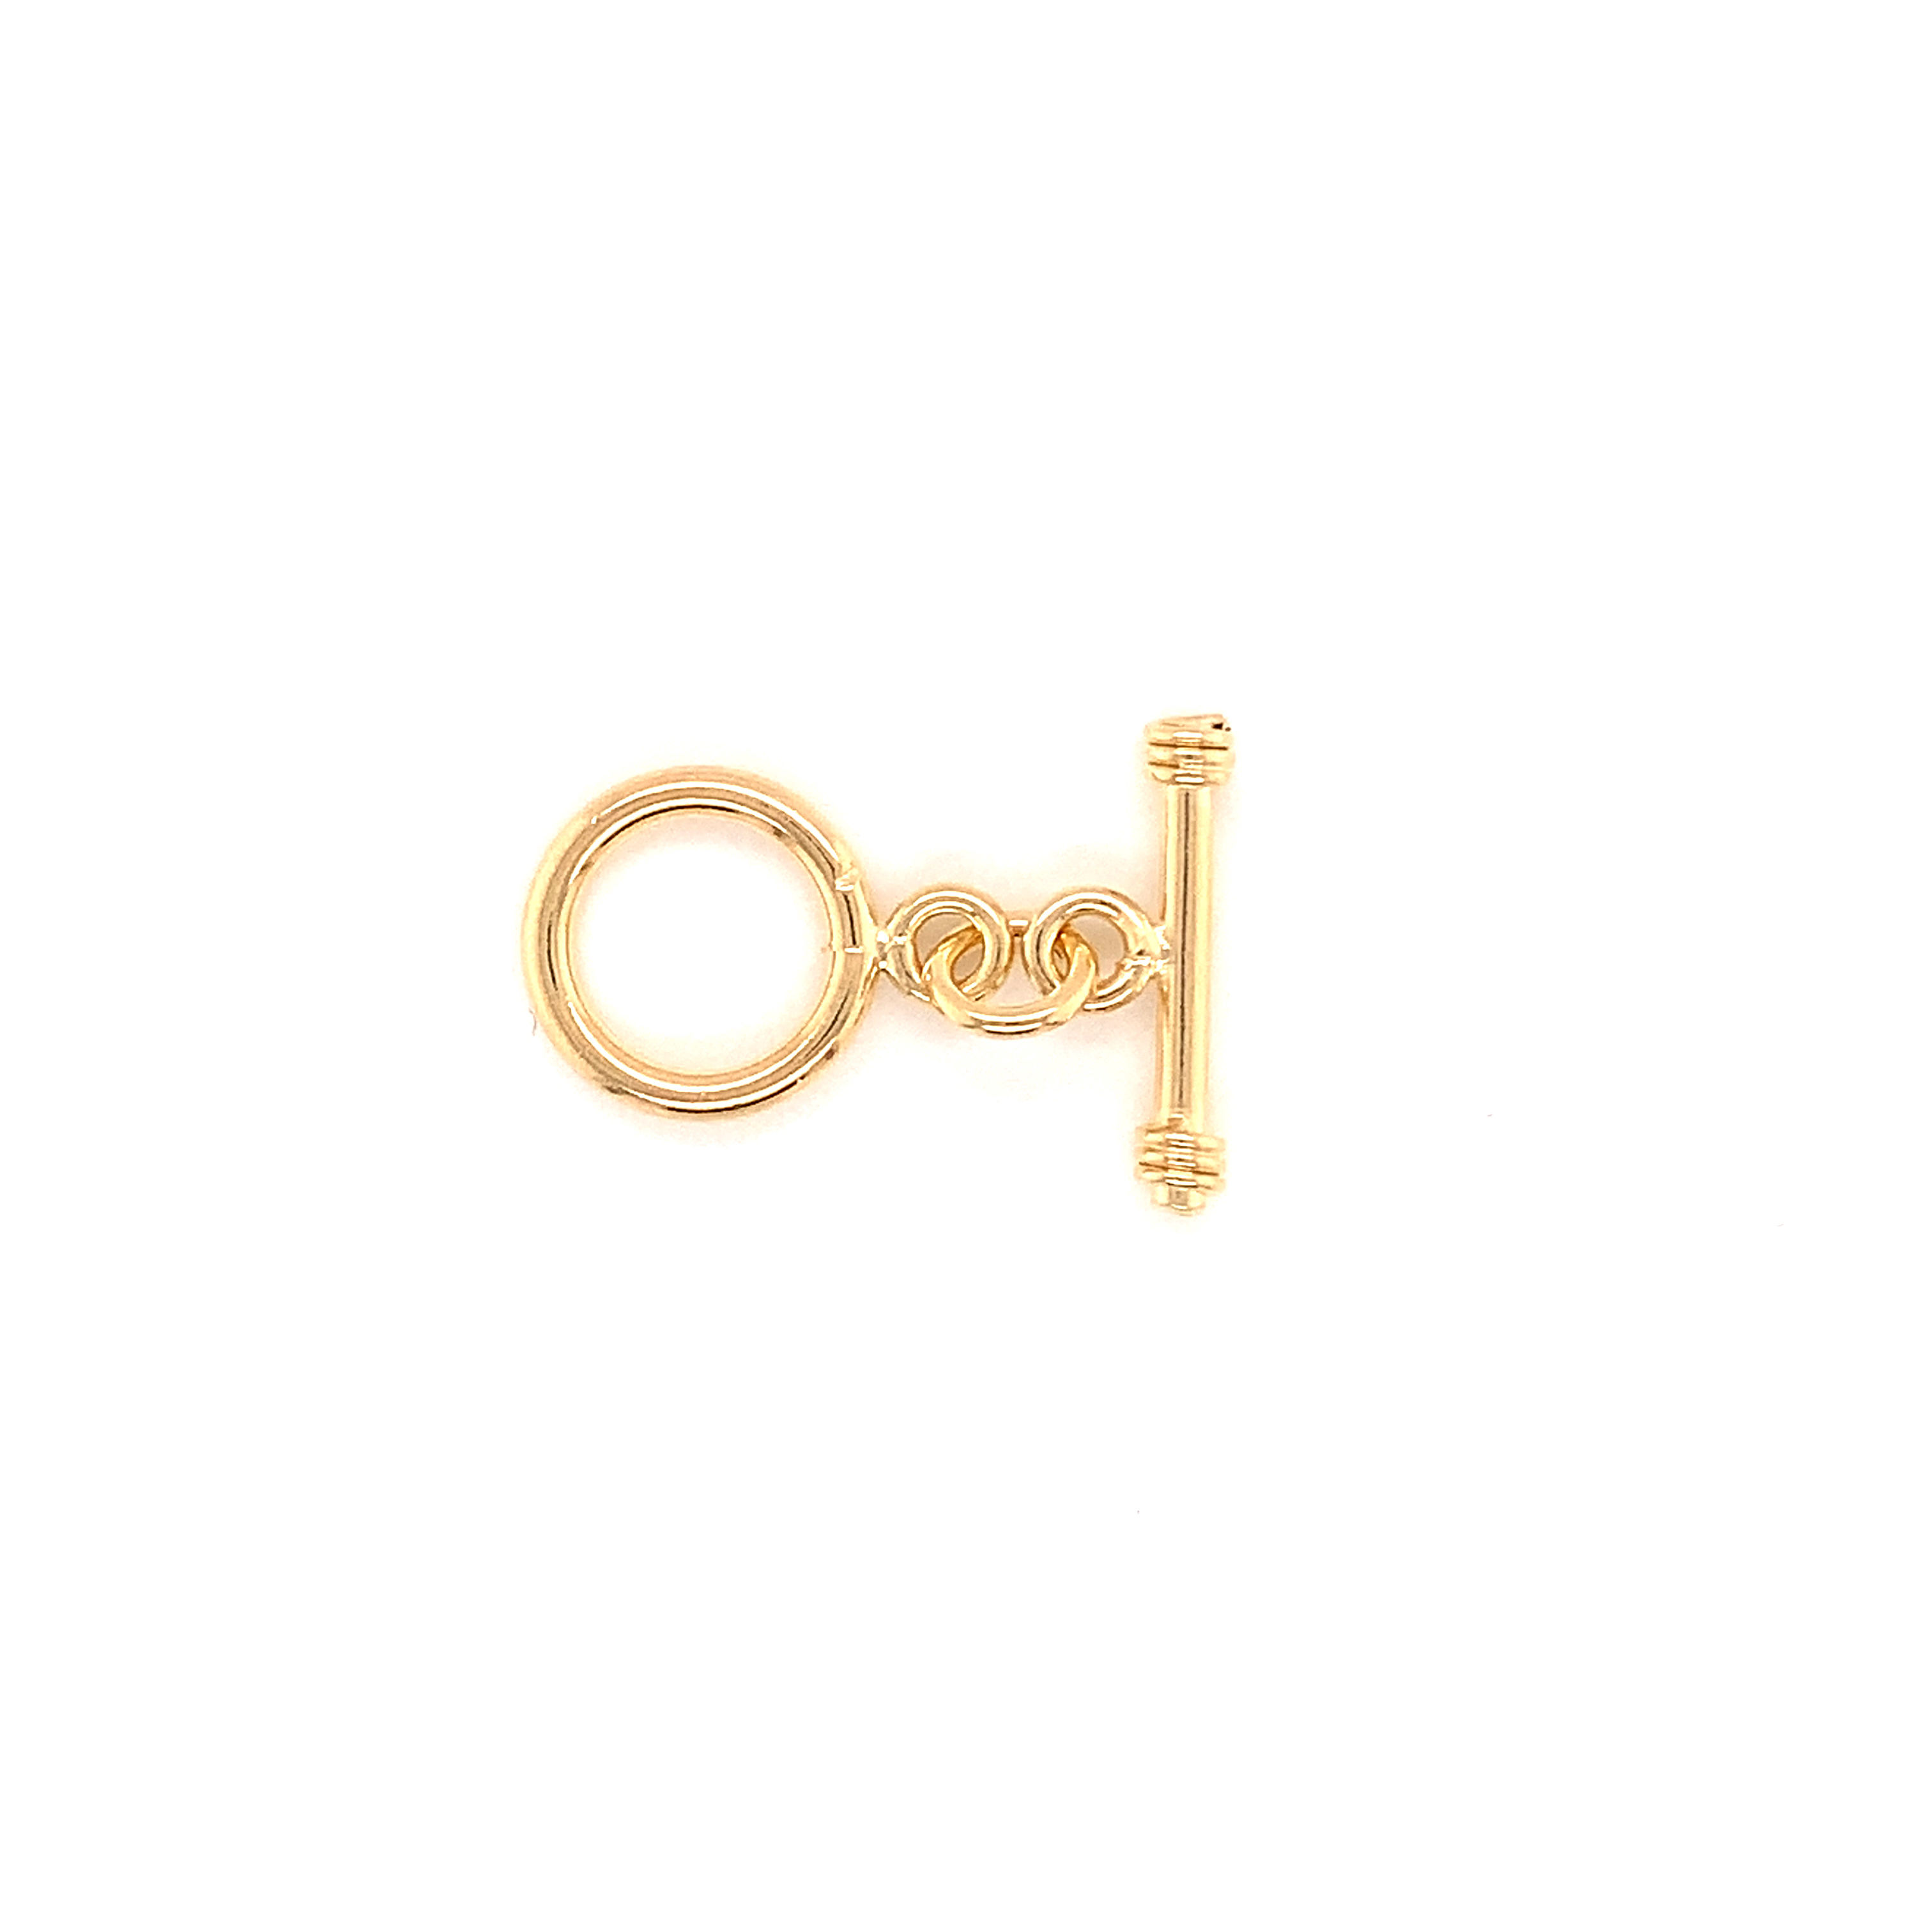 14mm Toggle Clasp - Gold Filled